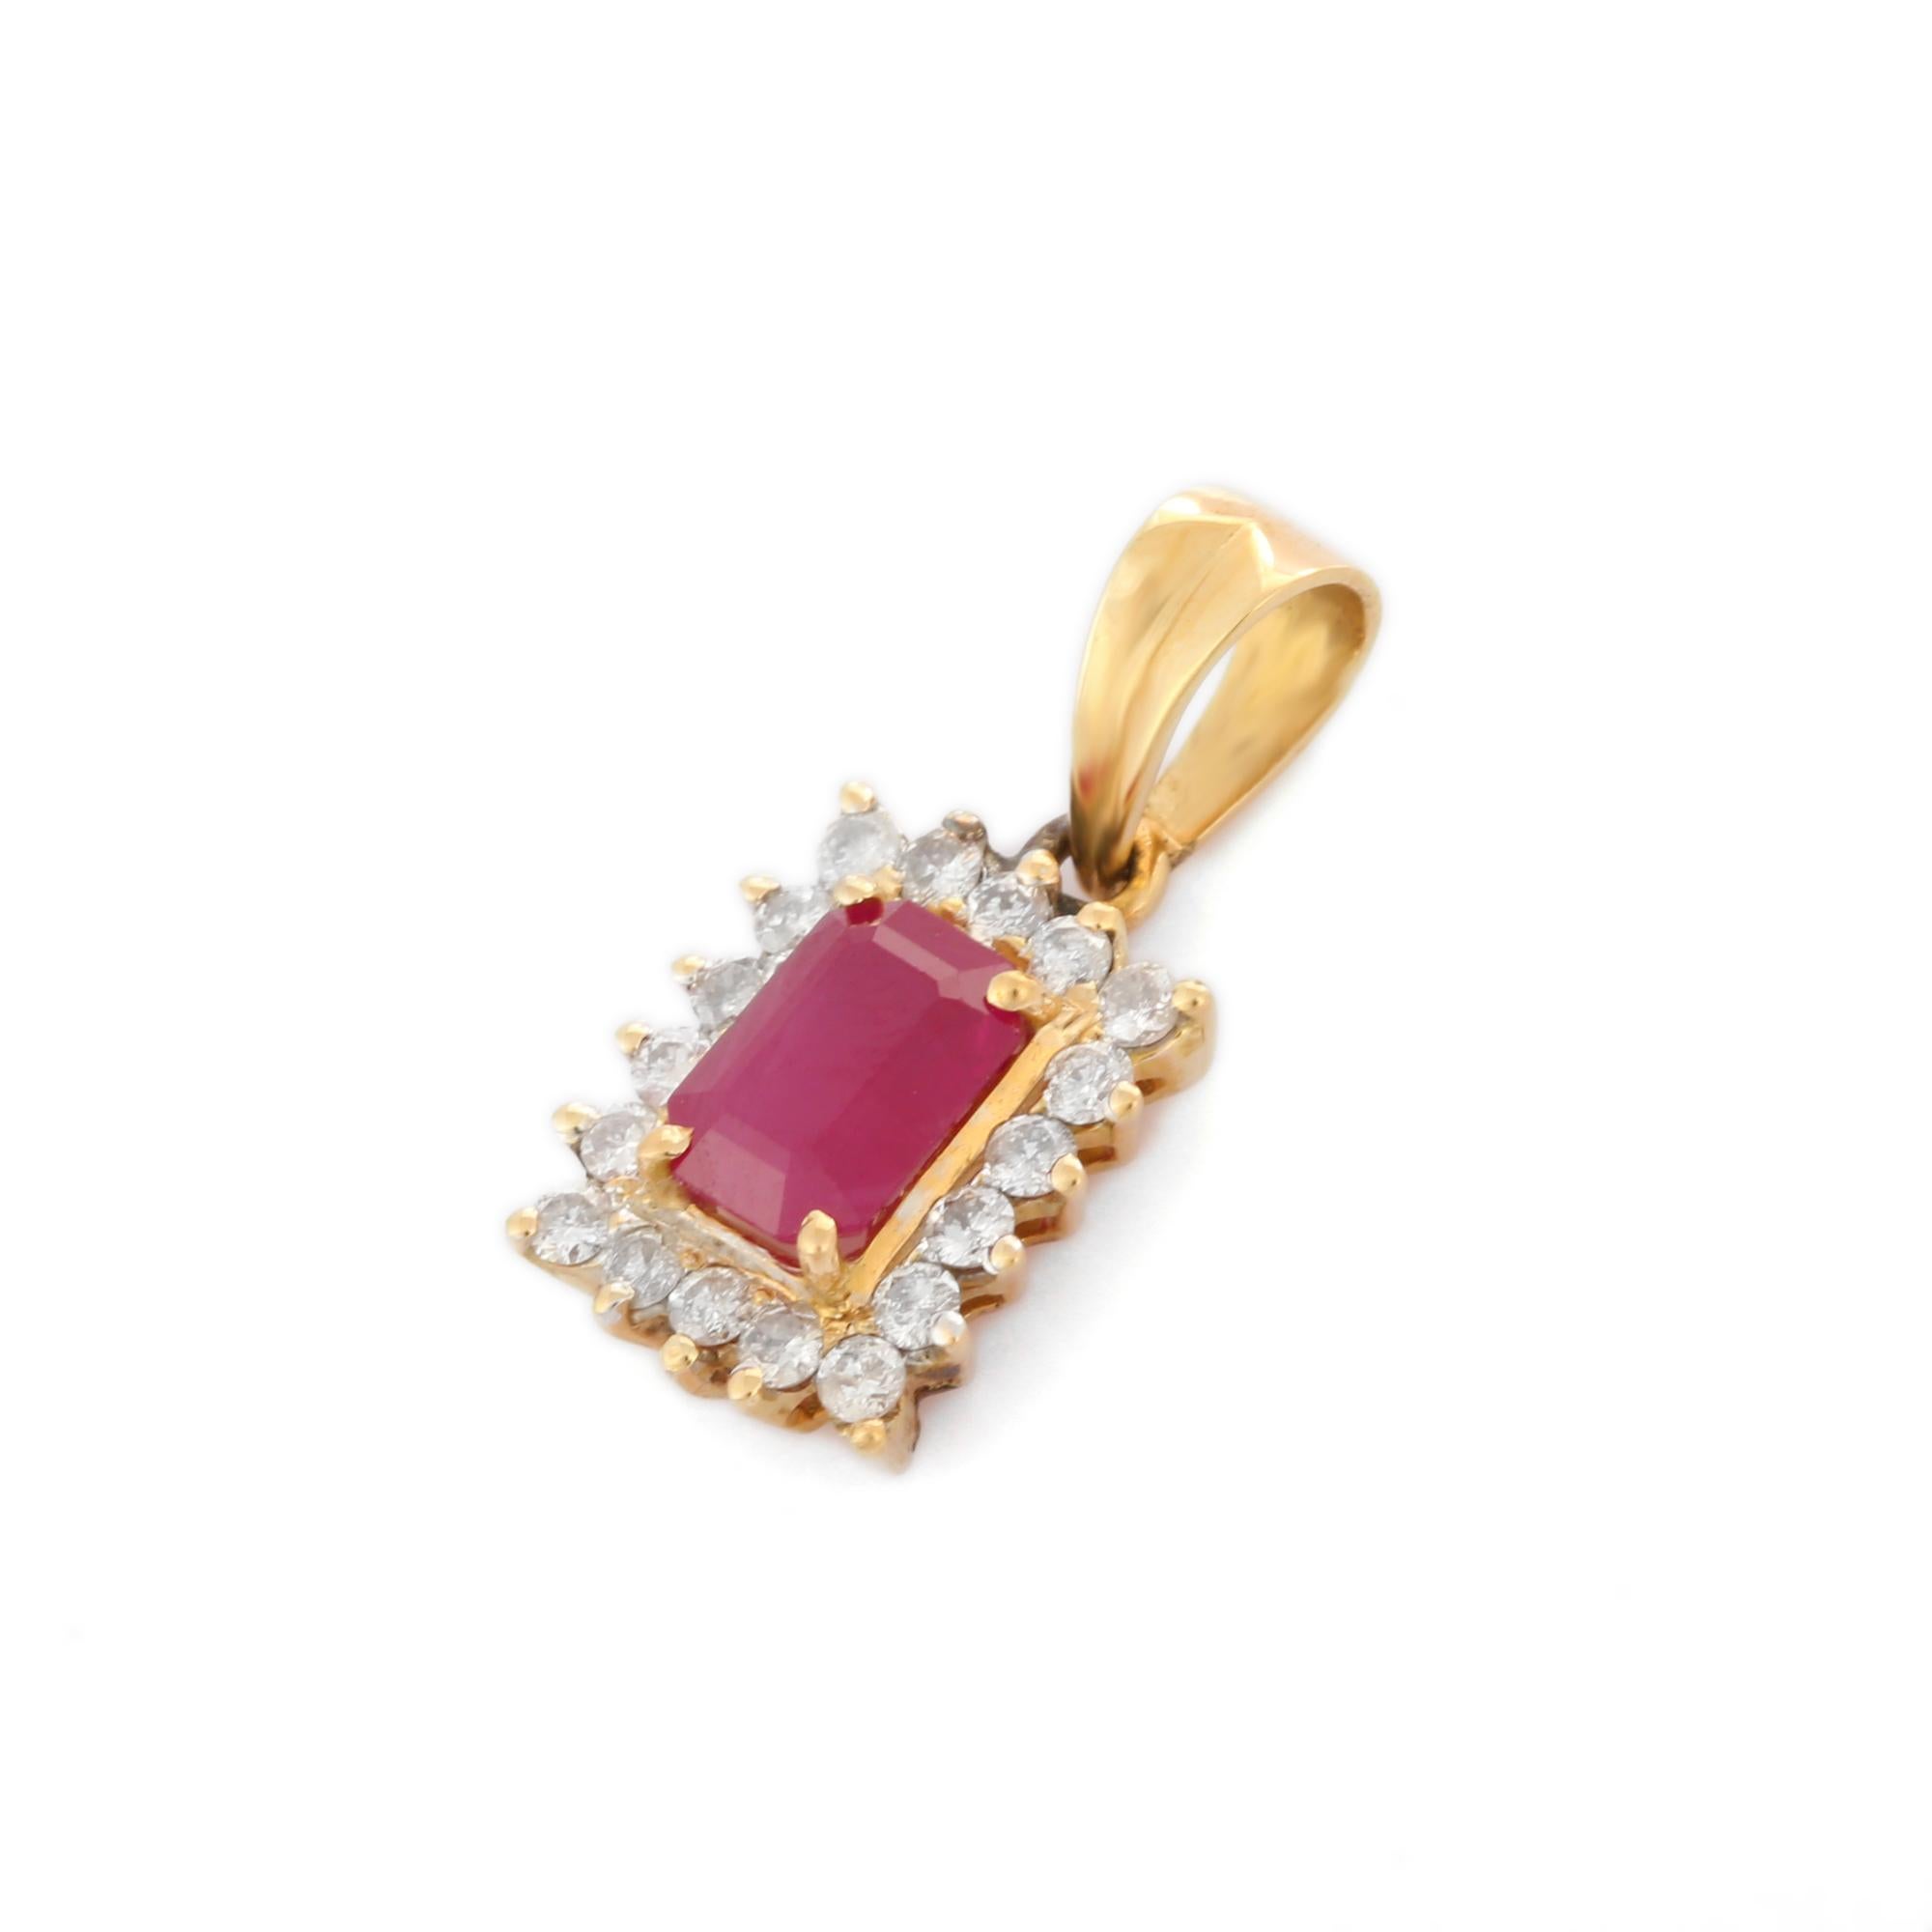 Modern 18K Yellow Gold 1.45 Ct Octagon Cut Ruby Diamond Halo Pendant Gift for Her For Sale